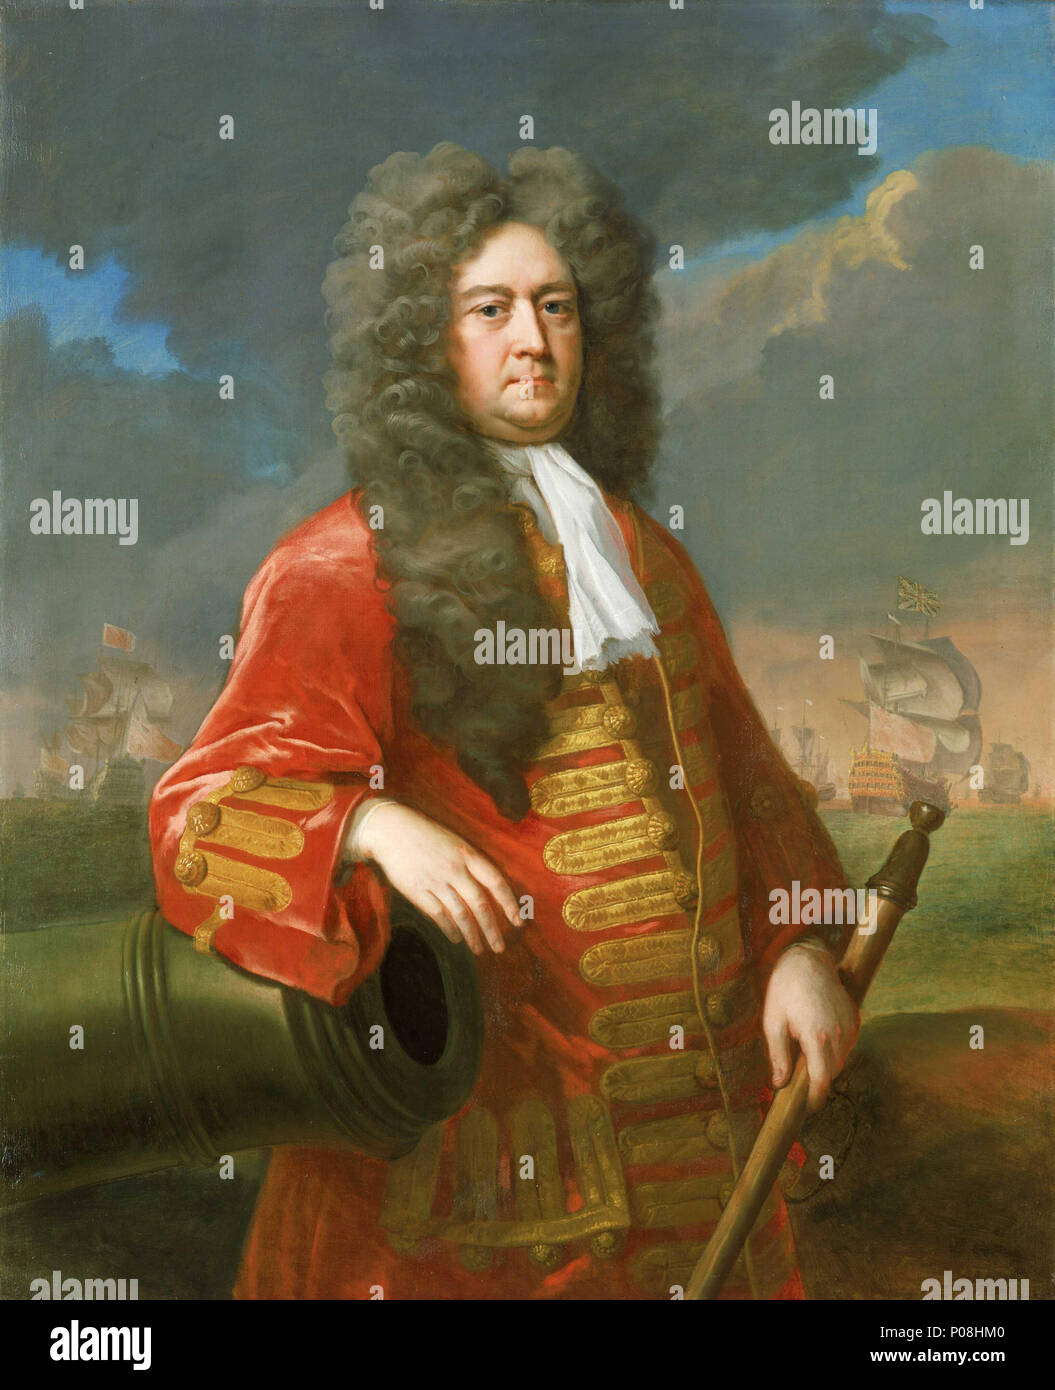 .  English: Admiral Sir George Rooke, c. 1650-1709 A three-quarter-length portrait to the right of Admiral Sir George Rooke, Admiral of the Fleet. He wears a gold-braided red cloth coat with wide sleeves, grey-brown full-bottomed wig and a white neck-cloth. His right arm rests on the muzzle of a cannon and he holds a telescope in his left hand. Behind him in both the right and left backgrounds, is a depiction of the Battle of Malaga, 1704. Admiral Rooke's flagship, the 'Royal Katharine' with the Union flag at the main, is seen in port-quarter view, engaging the 'Foudroyant', which was the flag Stock Photo